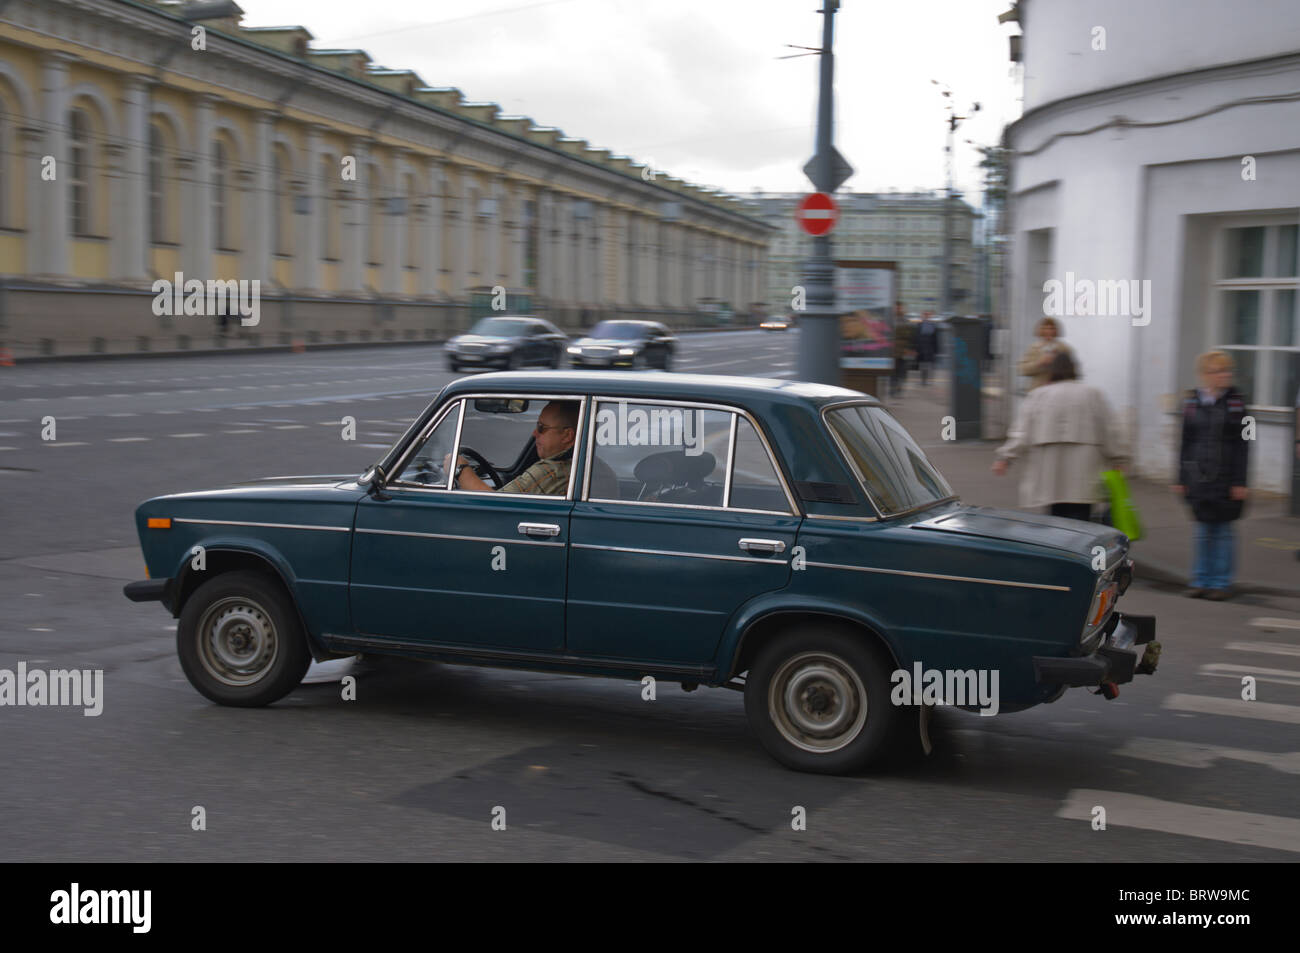 Lada on the move central Moscow Russia Europe Stock Photo